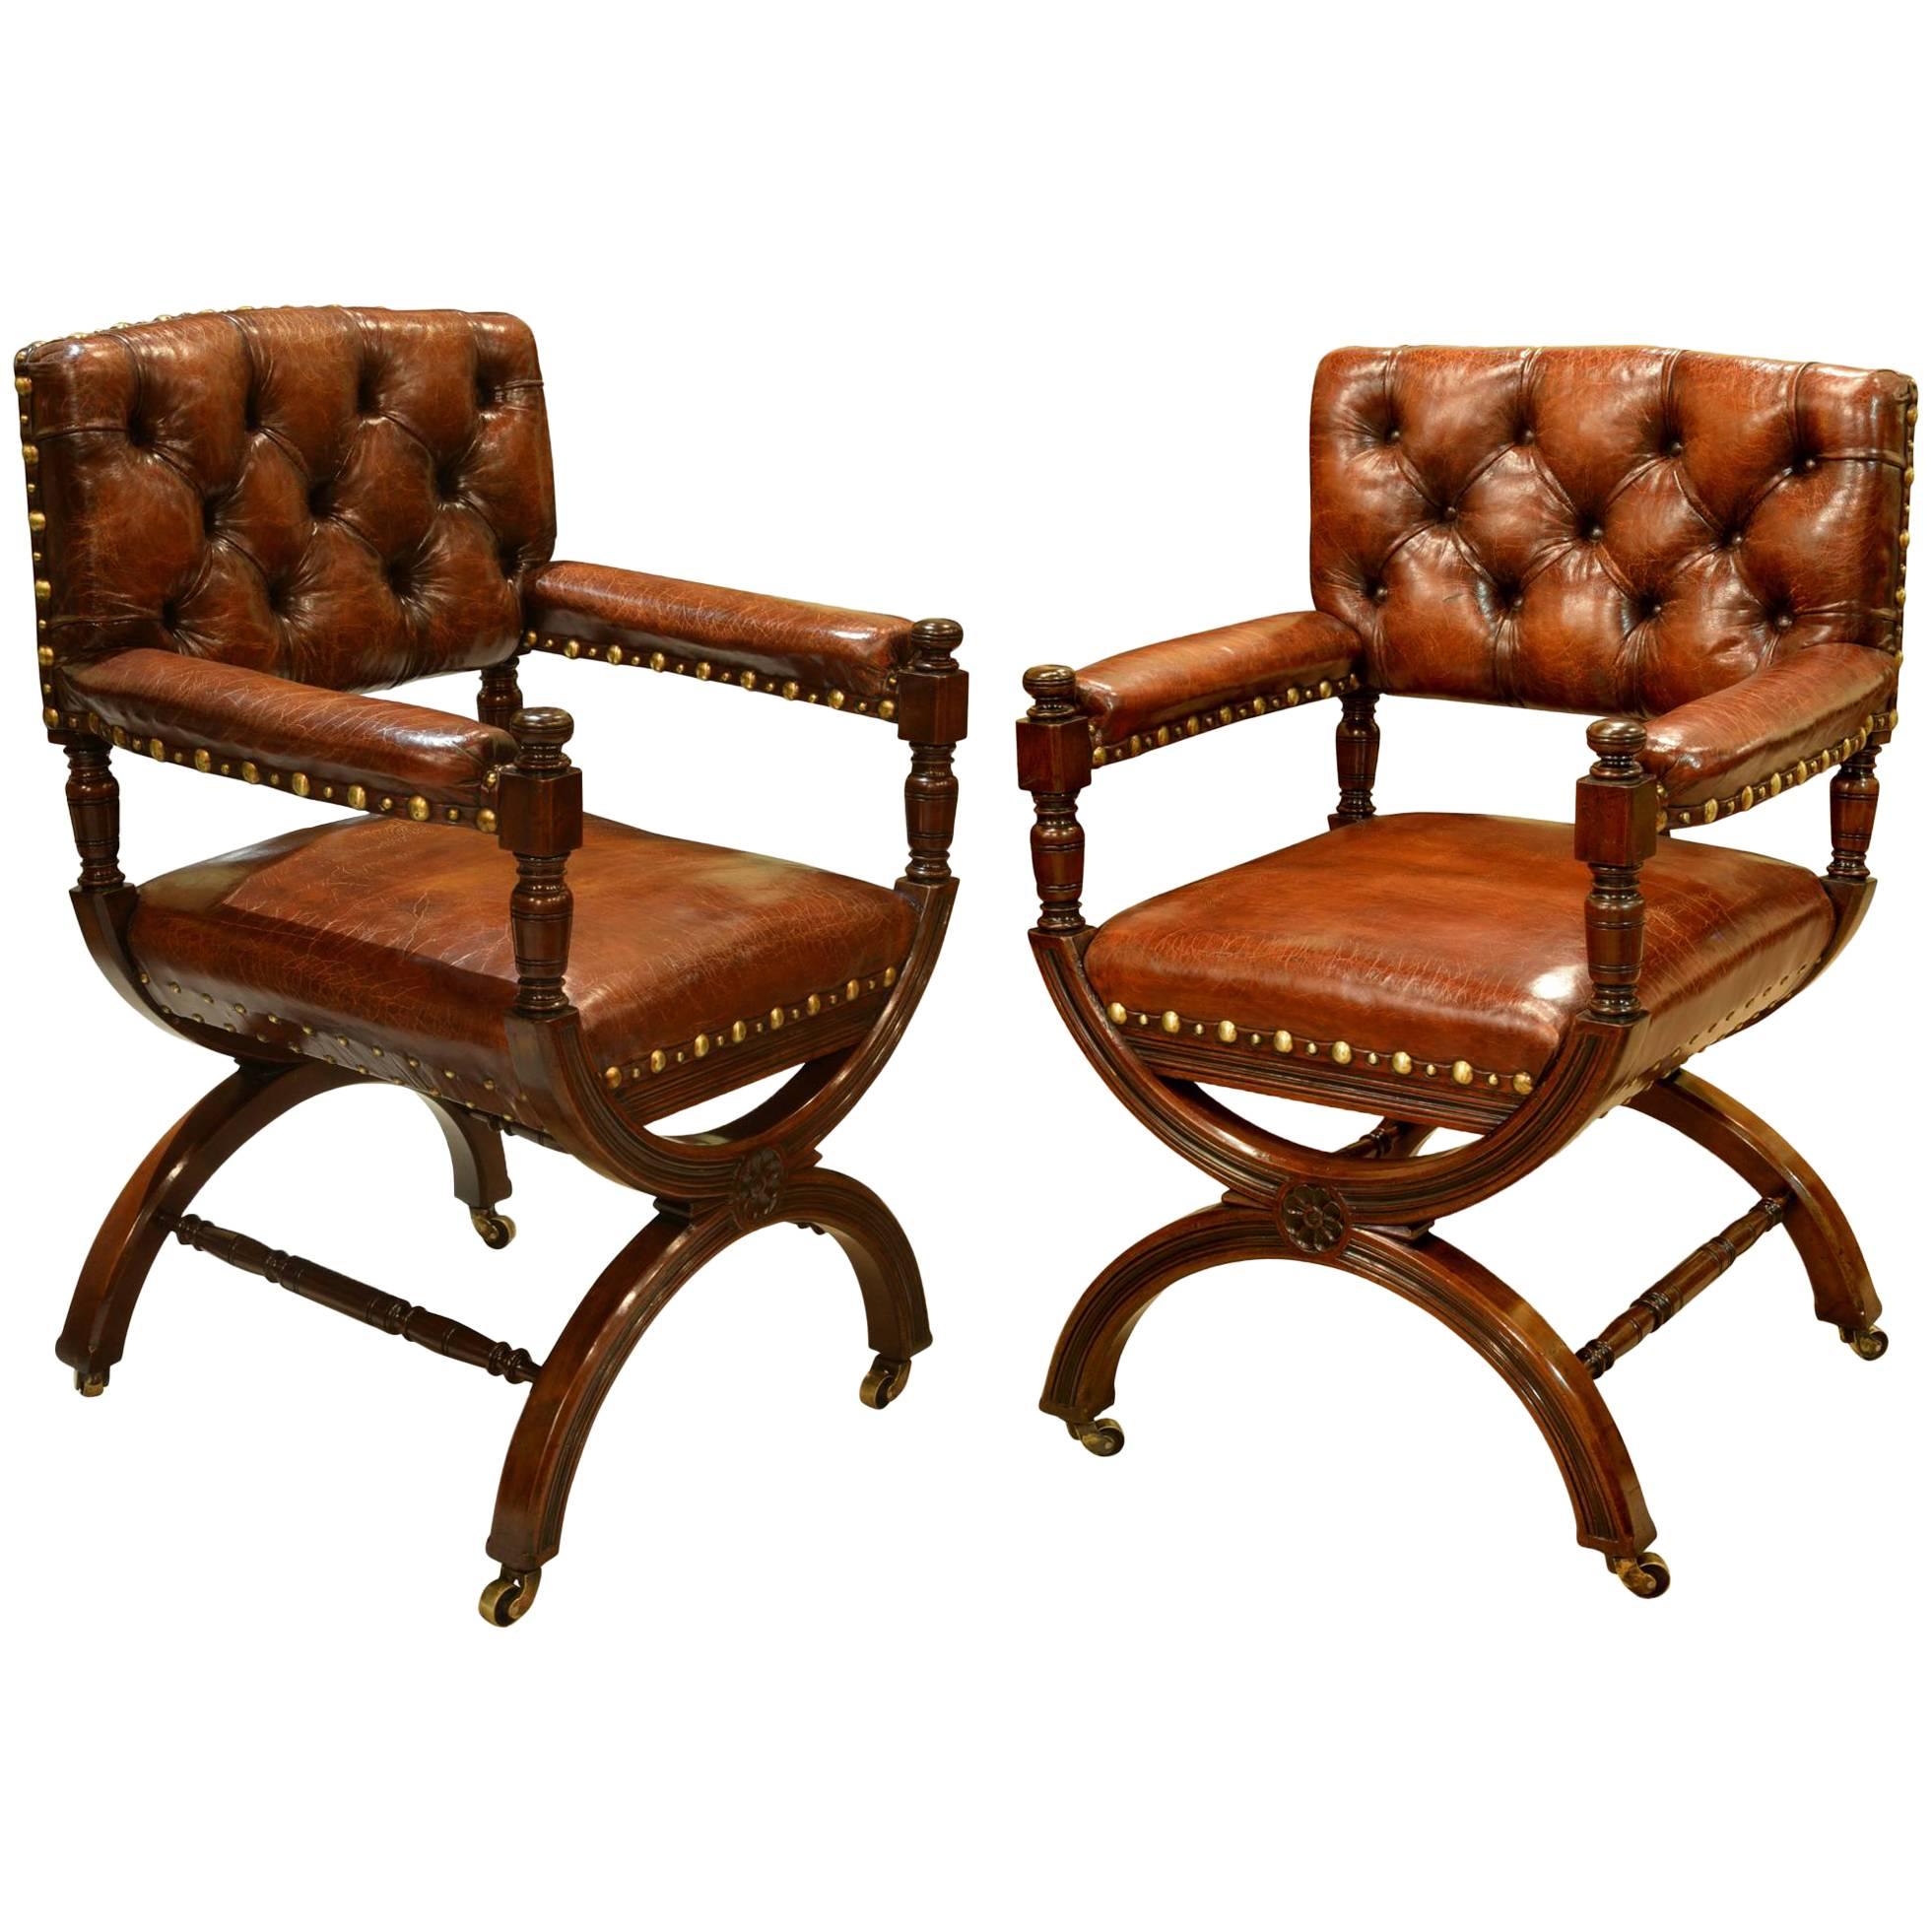 Pair of 19th Century Mahogany Library Chairs For Sale